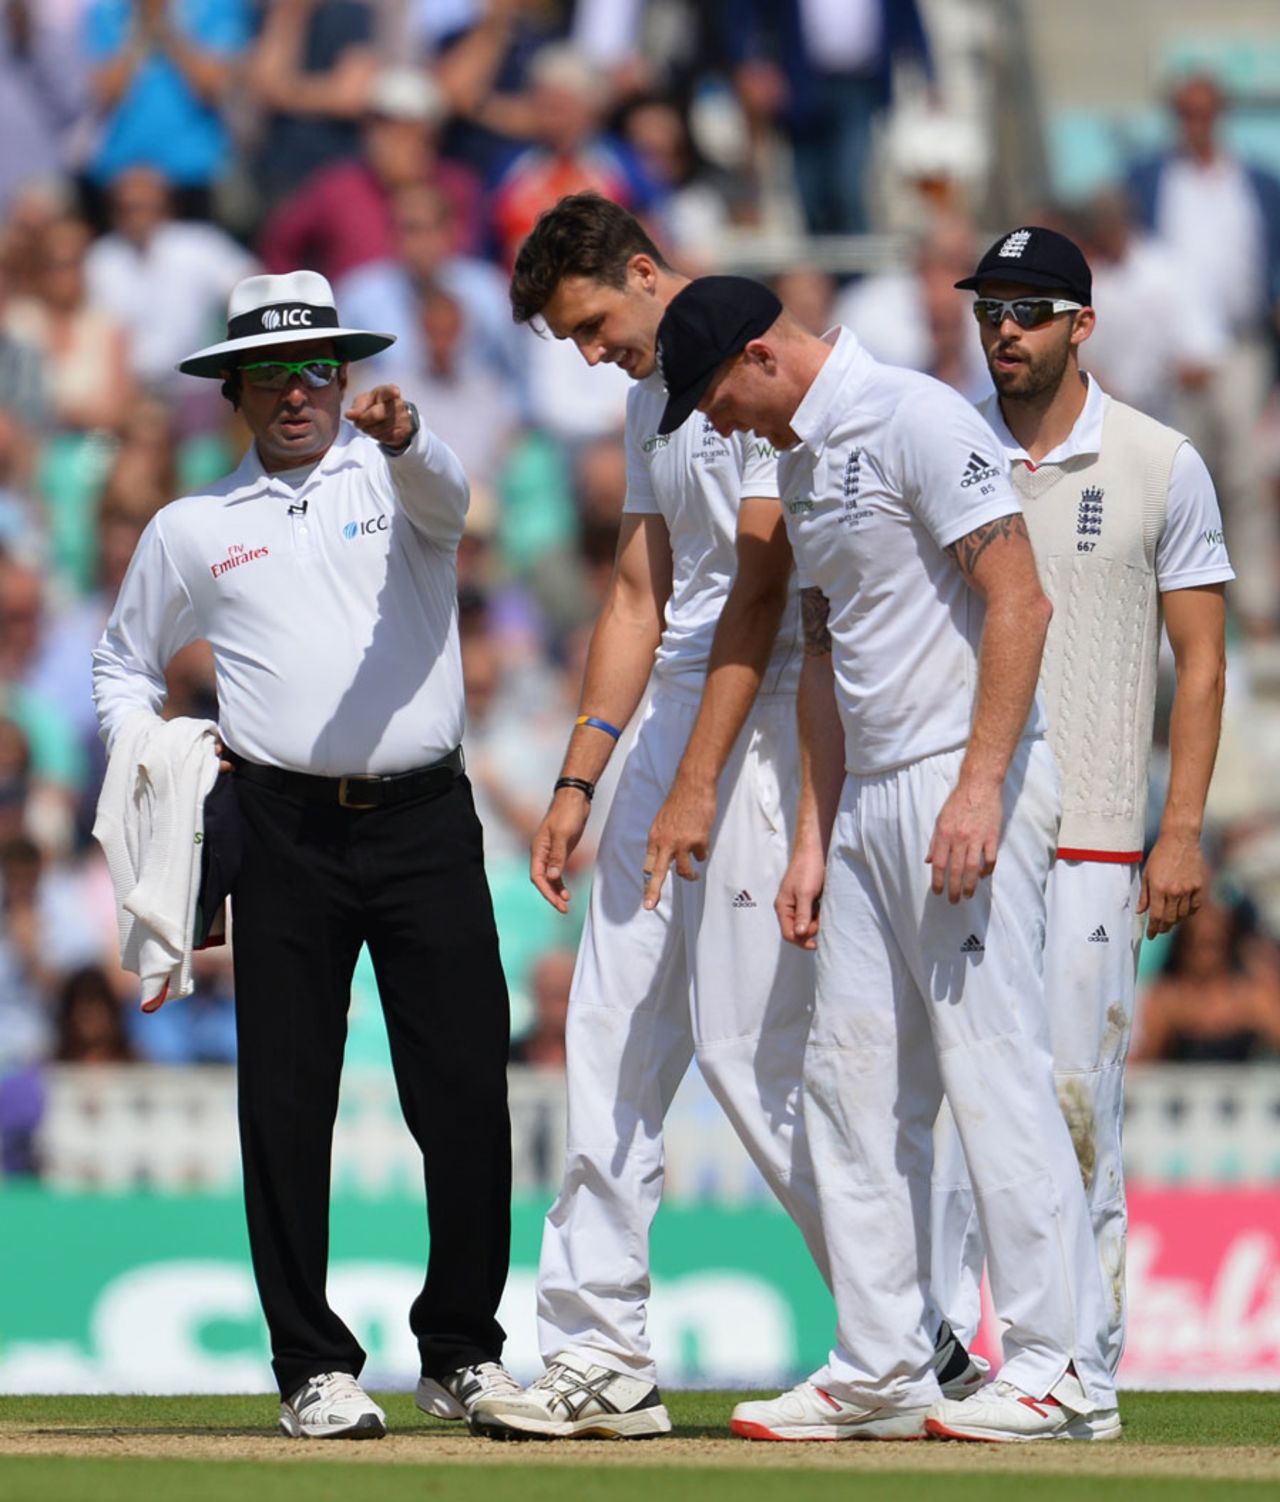 Steven Finn was again denied his 100th Test wicket by a front-foot no-ball,  England v Australia, 5th Investec Ashes Test, The Oval, 2nd day, August 21, 2015